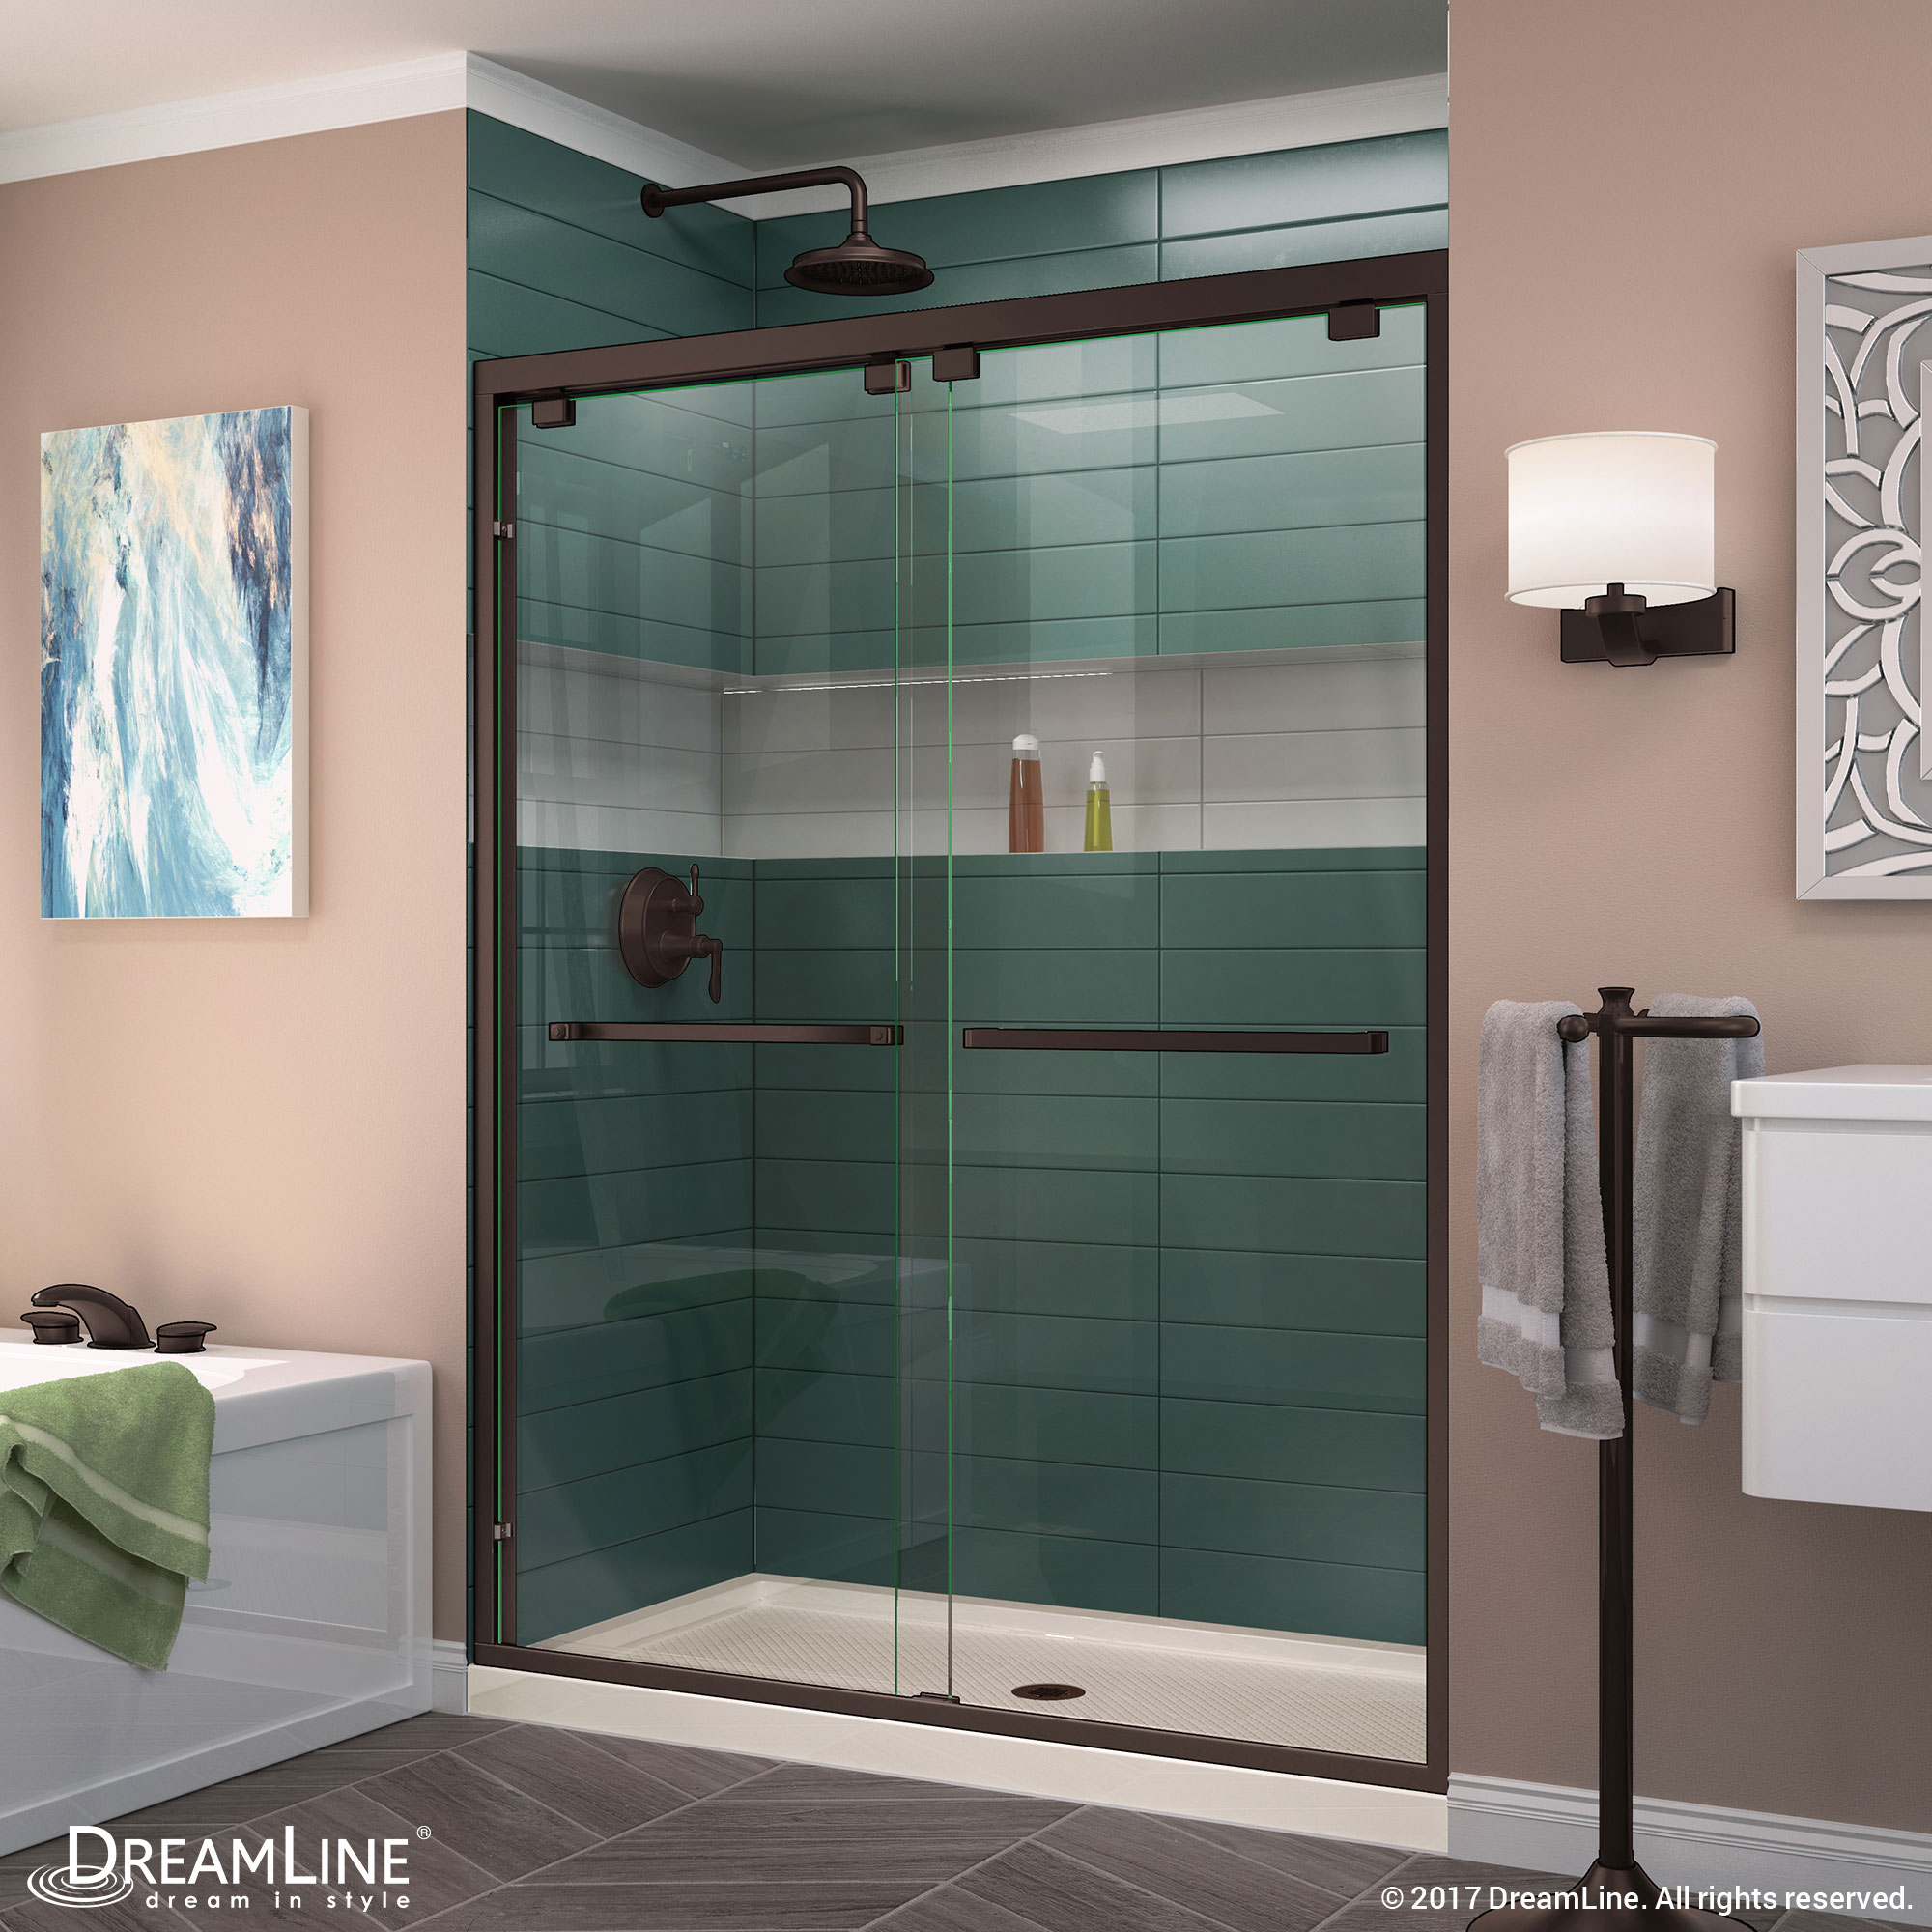 DreamLine Encore 36 in. D x 48 in. W x 78 3/4 in. H Bypass Shower Door in Brushed Nickel with Center Drain Biscuit Base Kit